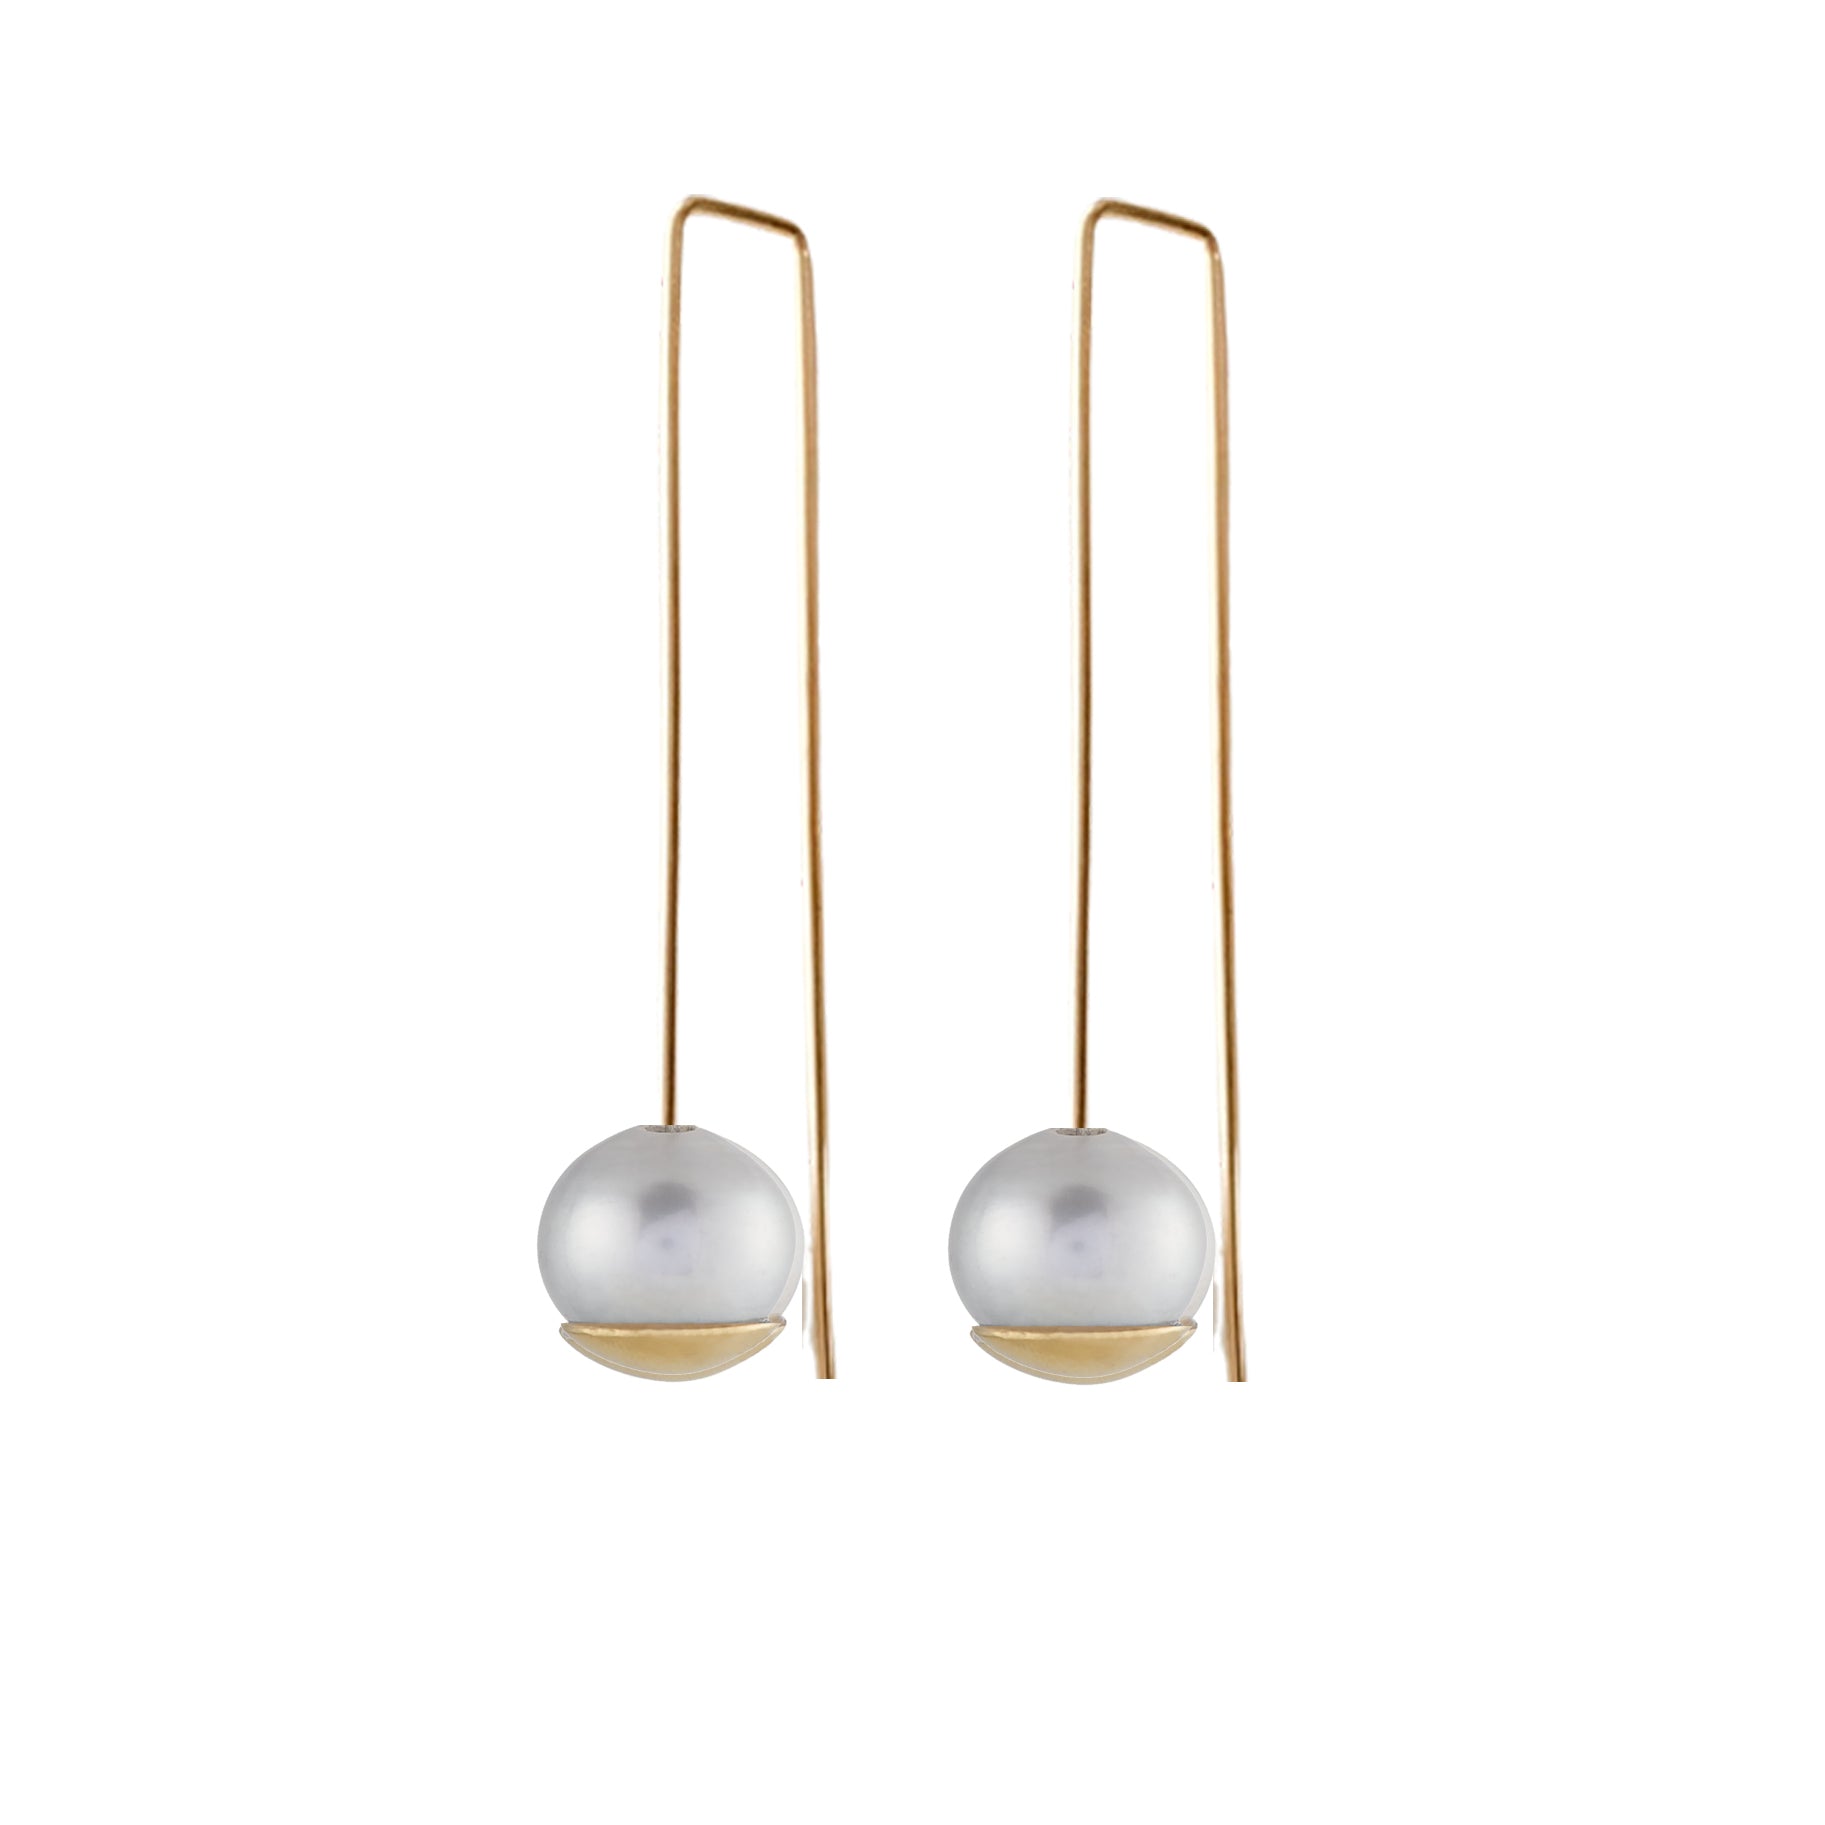 Balance Pearl Grey - CLICK TO CHOOSE (short or long) (Gold filled 14k or Sterling)